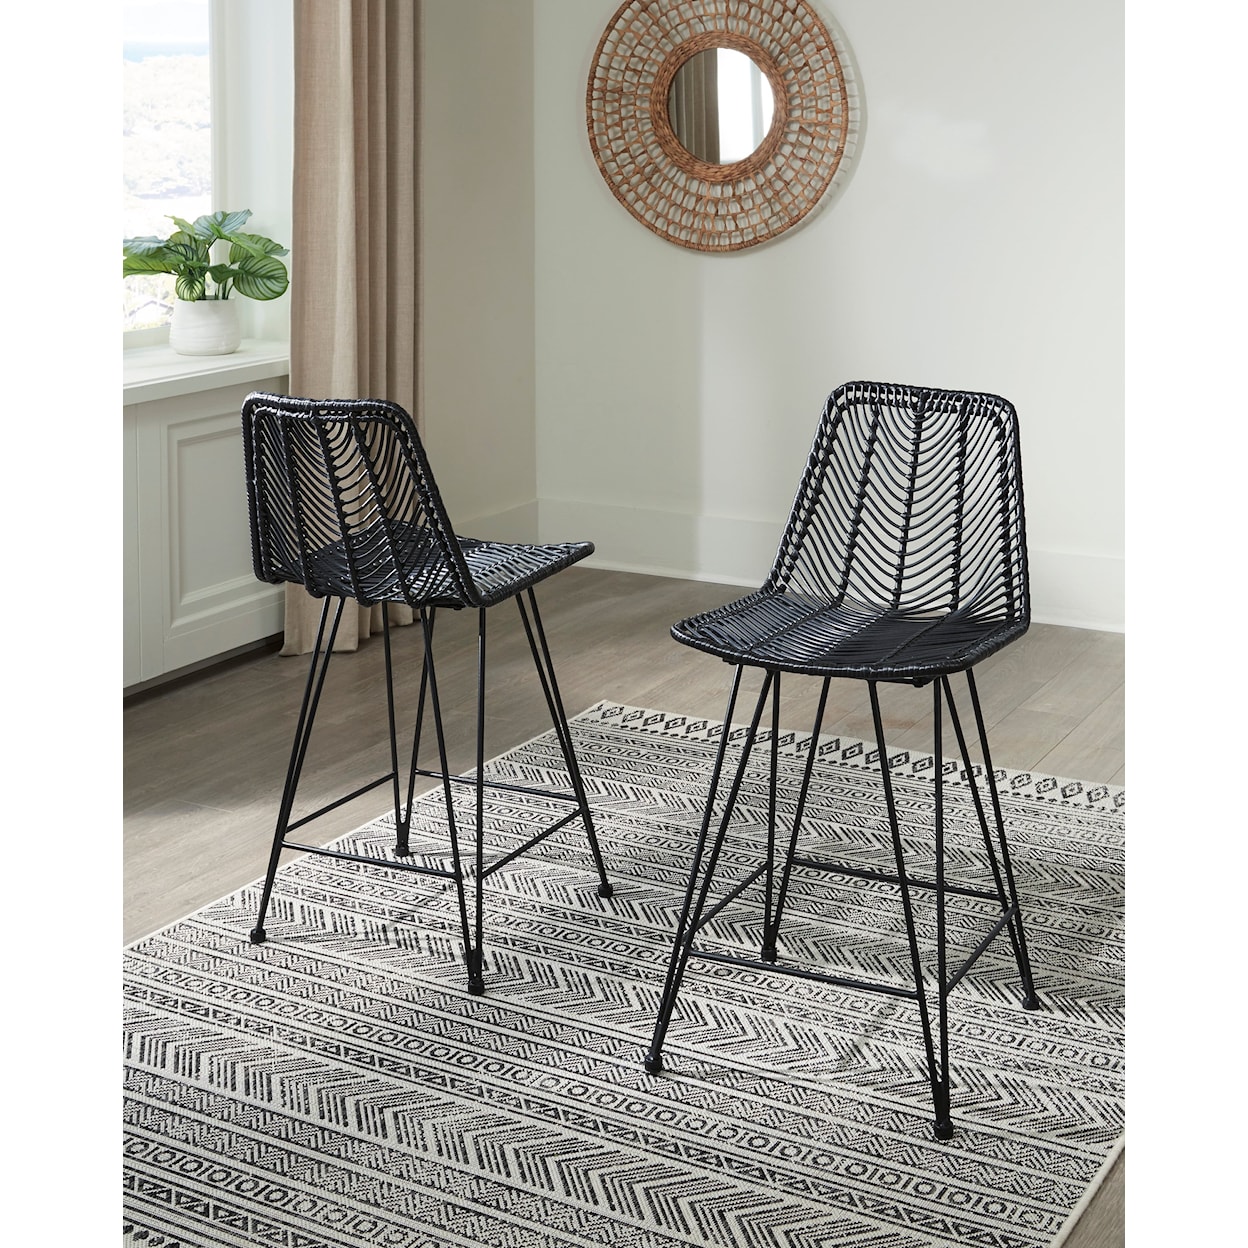 Signature Design by Ashley Angentree Counter Height Bar Stool